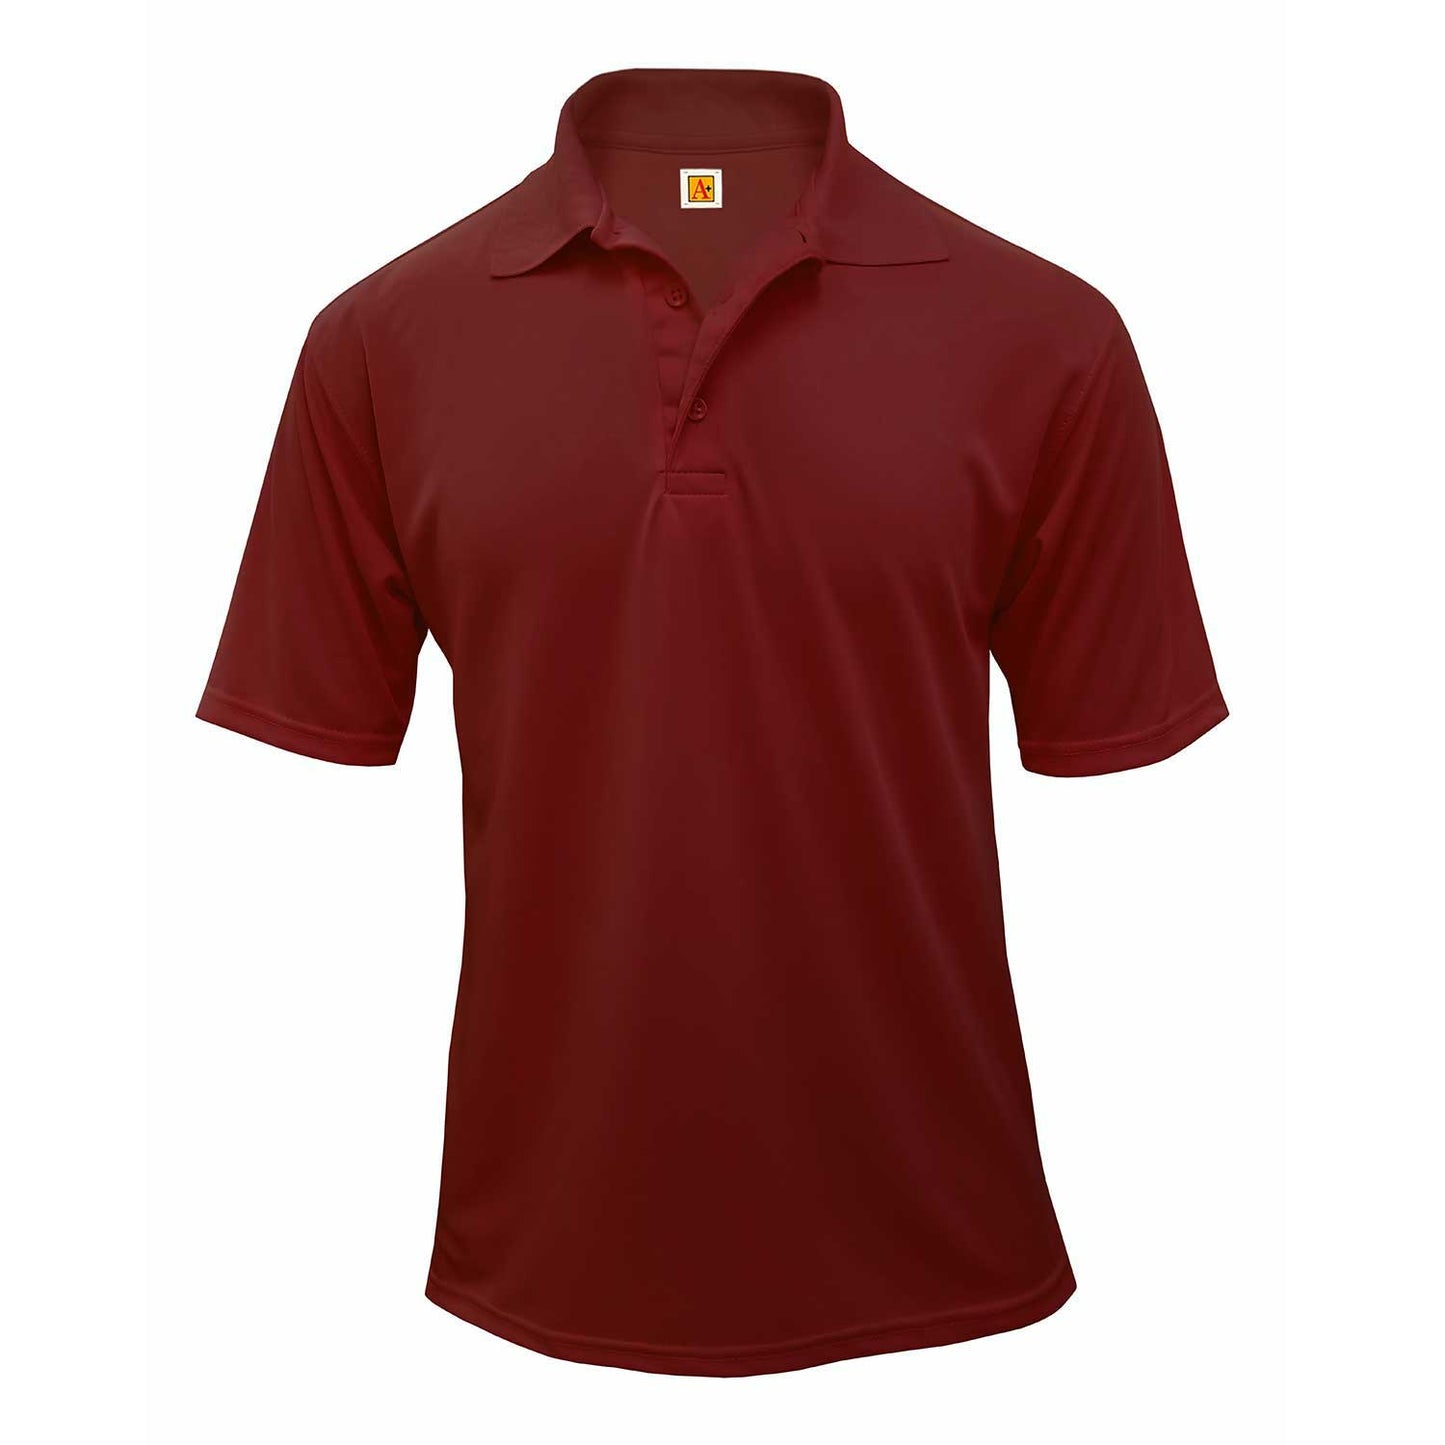 Adult Performance Polo